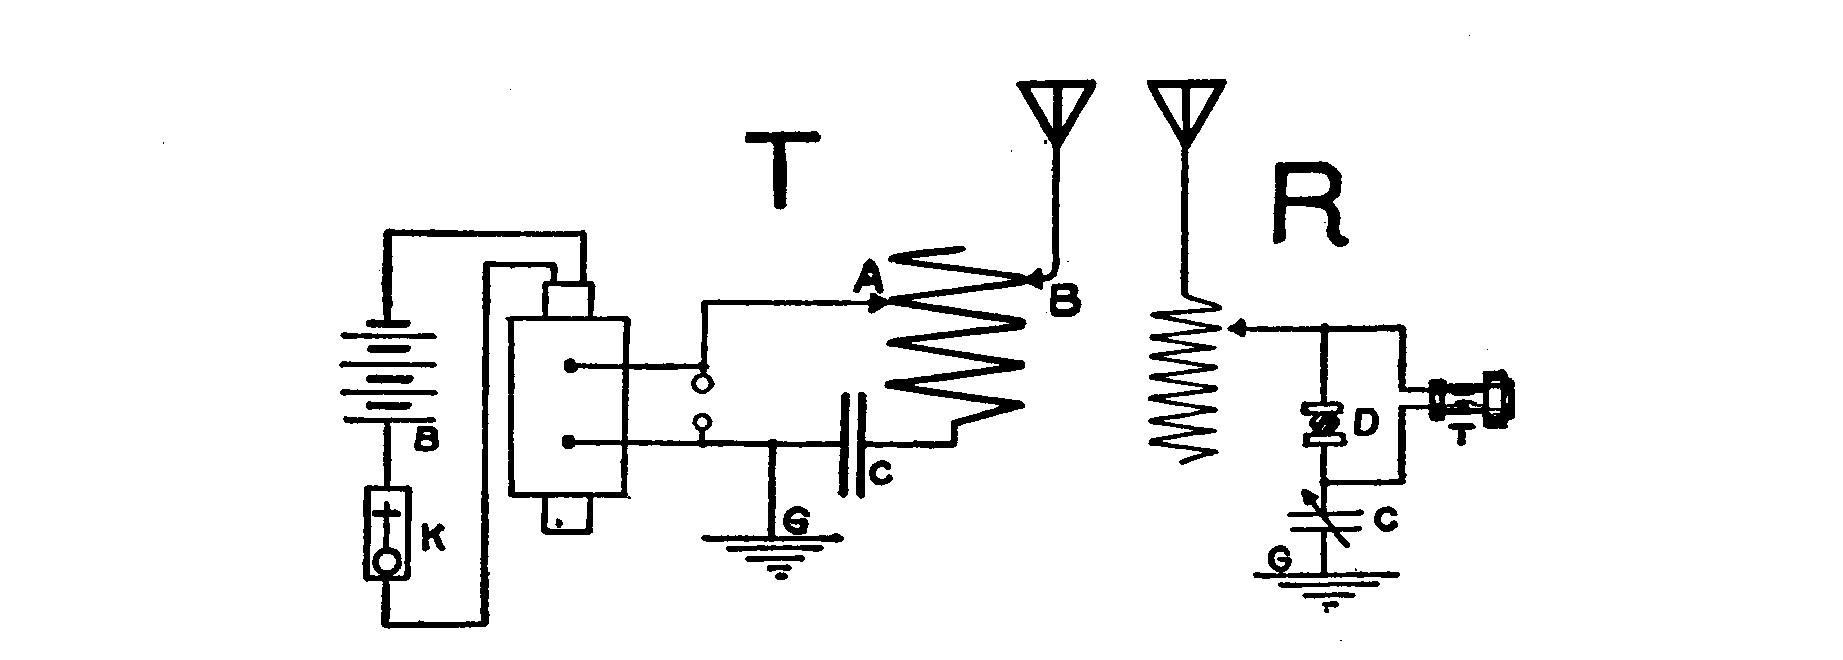 Fig. 9. Tuned Wireless Telegraph Transmitter and Receptor